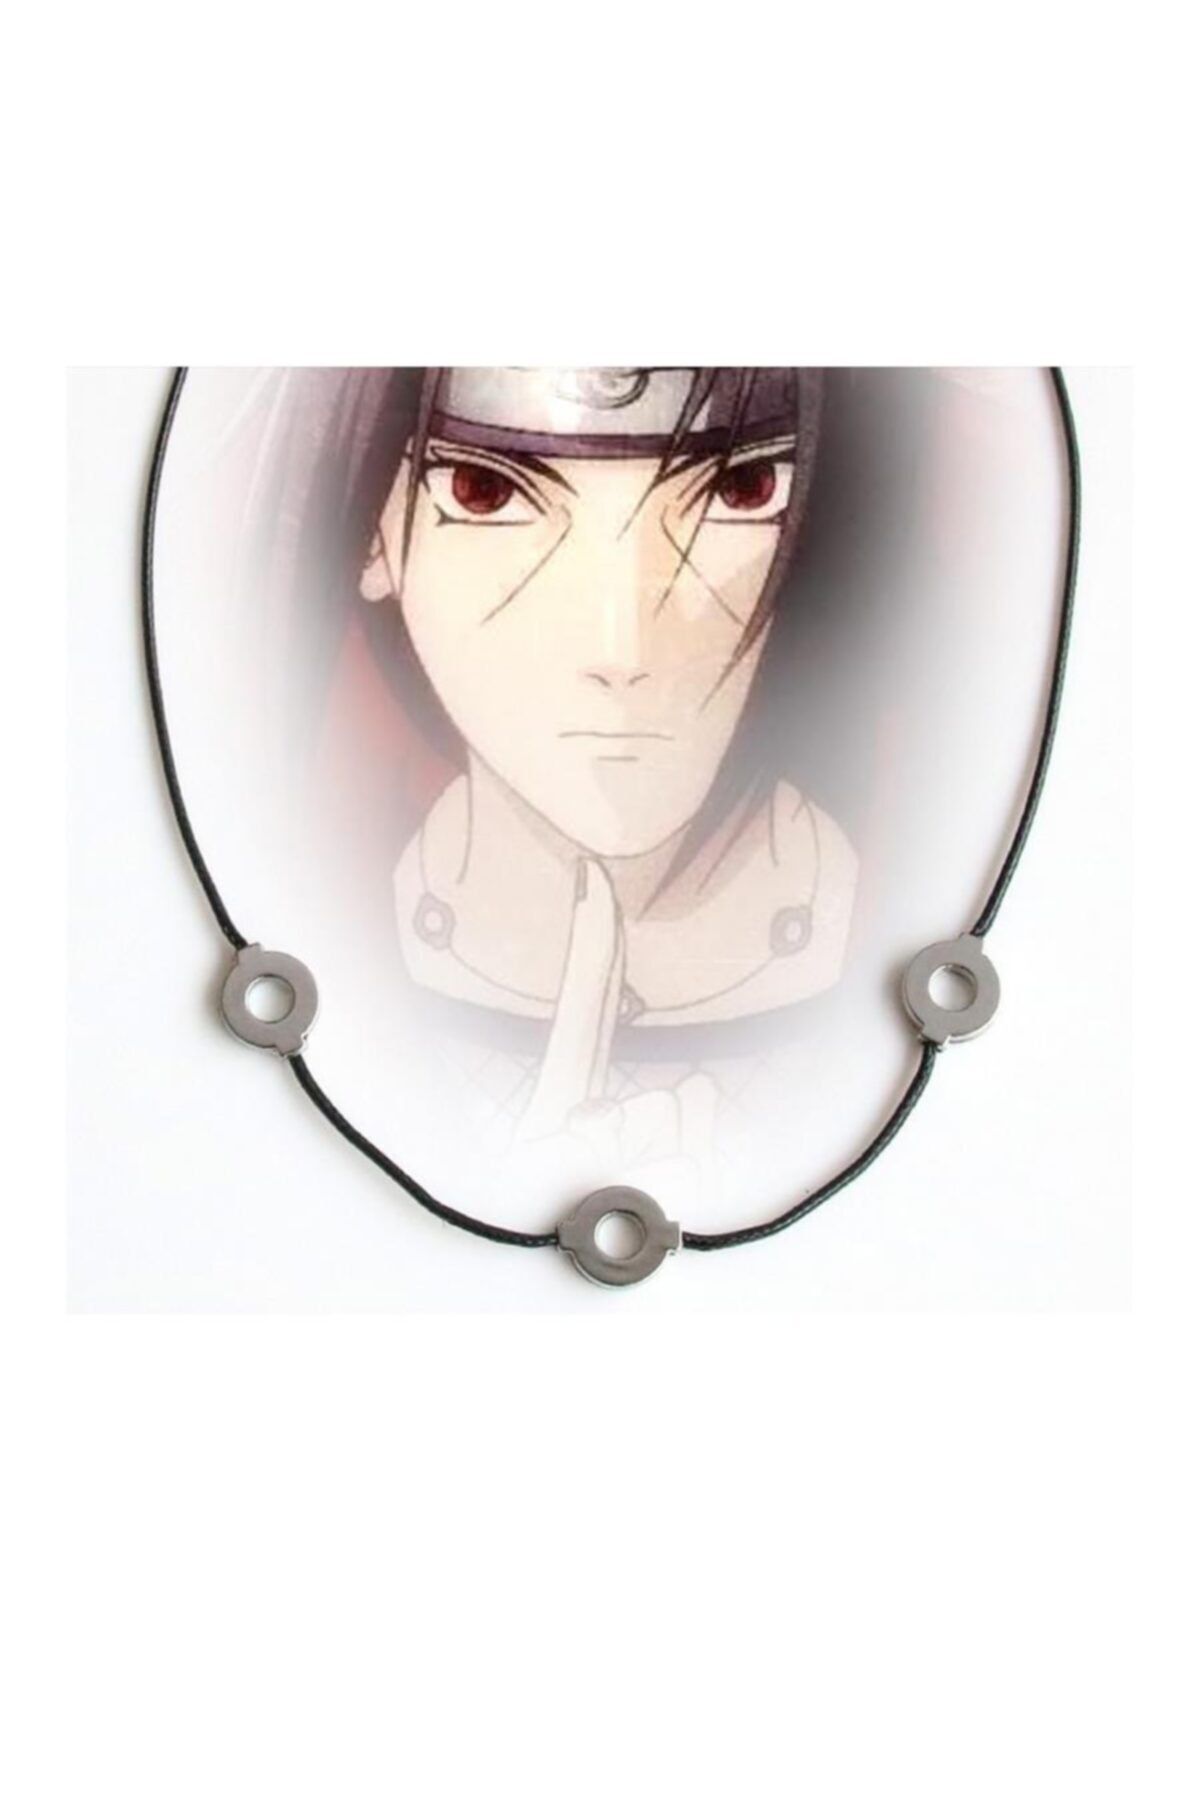 Itachi Necklace Cospl 3 Loops Naruto Akat Uchiha Necklaces & Pendants  Jewelry Choker Chain As Gift #65952 | Cosplay necklace, Itachi cosplay,  Naruto merchandise